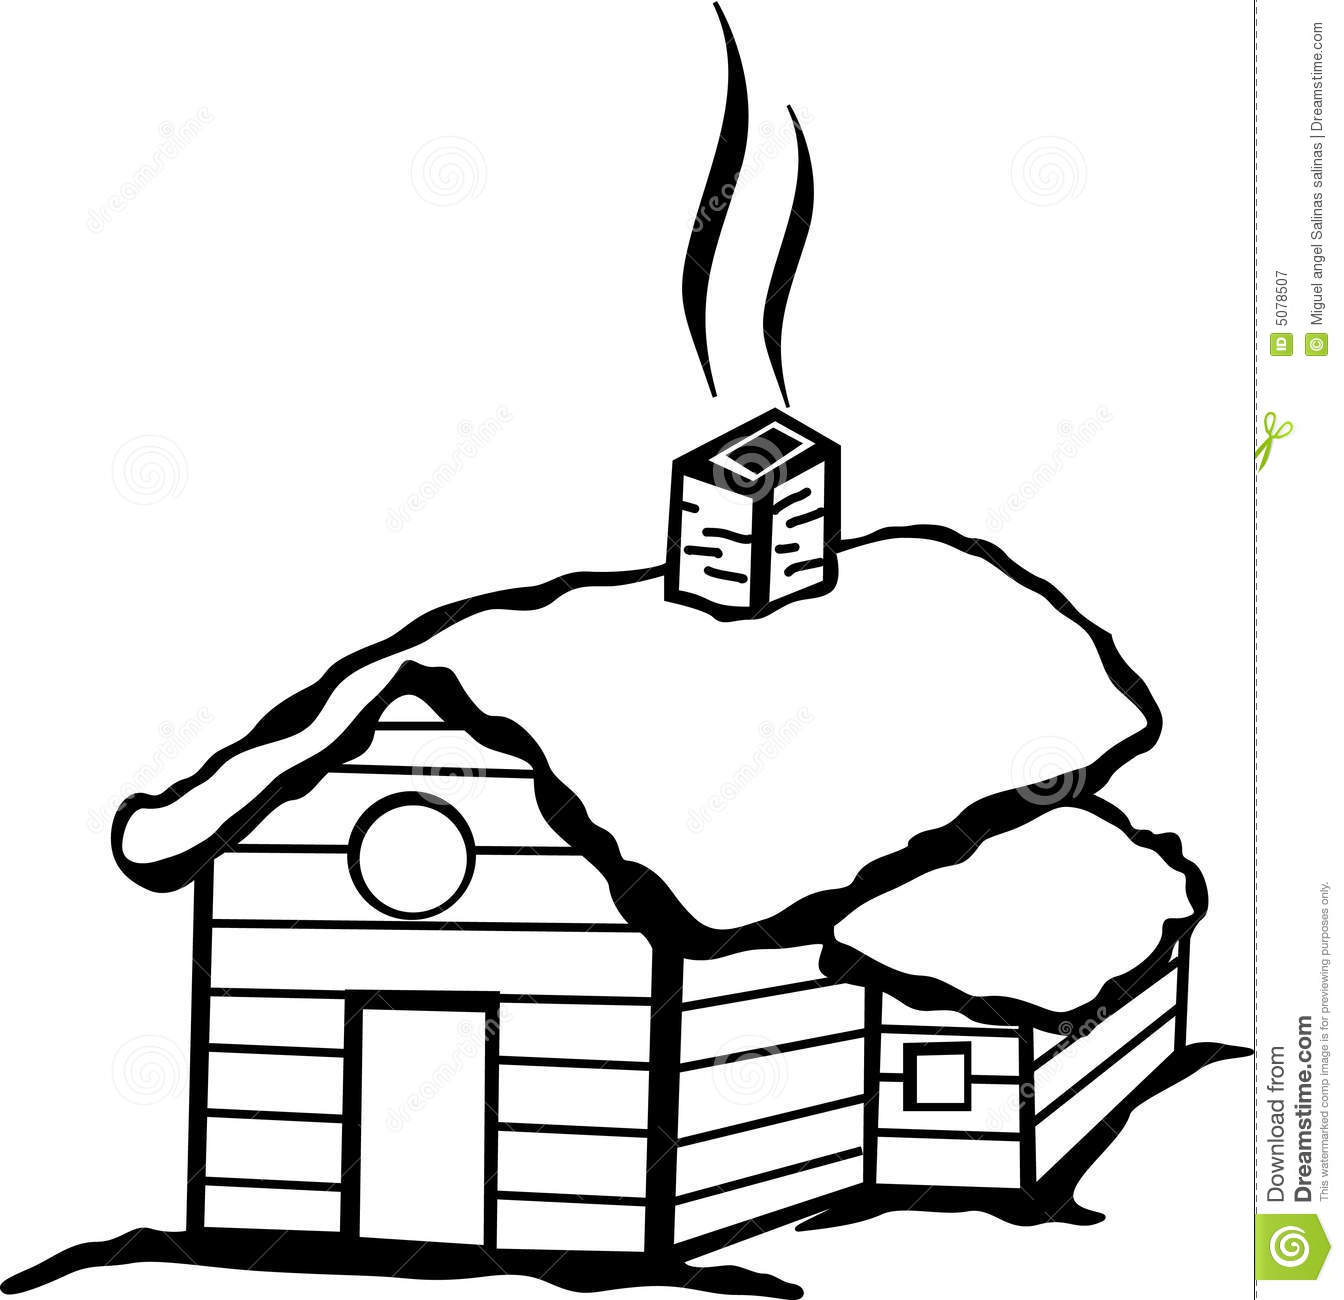 Cabin With Snow Vector Illustration Royalty Free Stock Photography